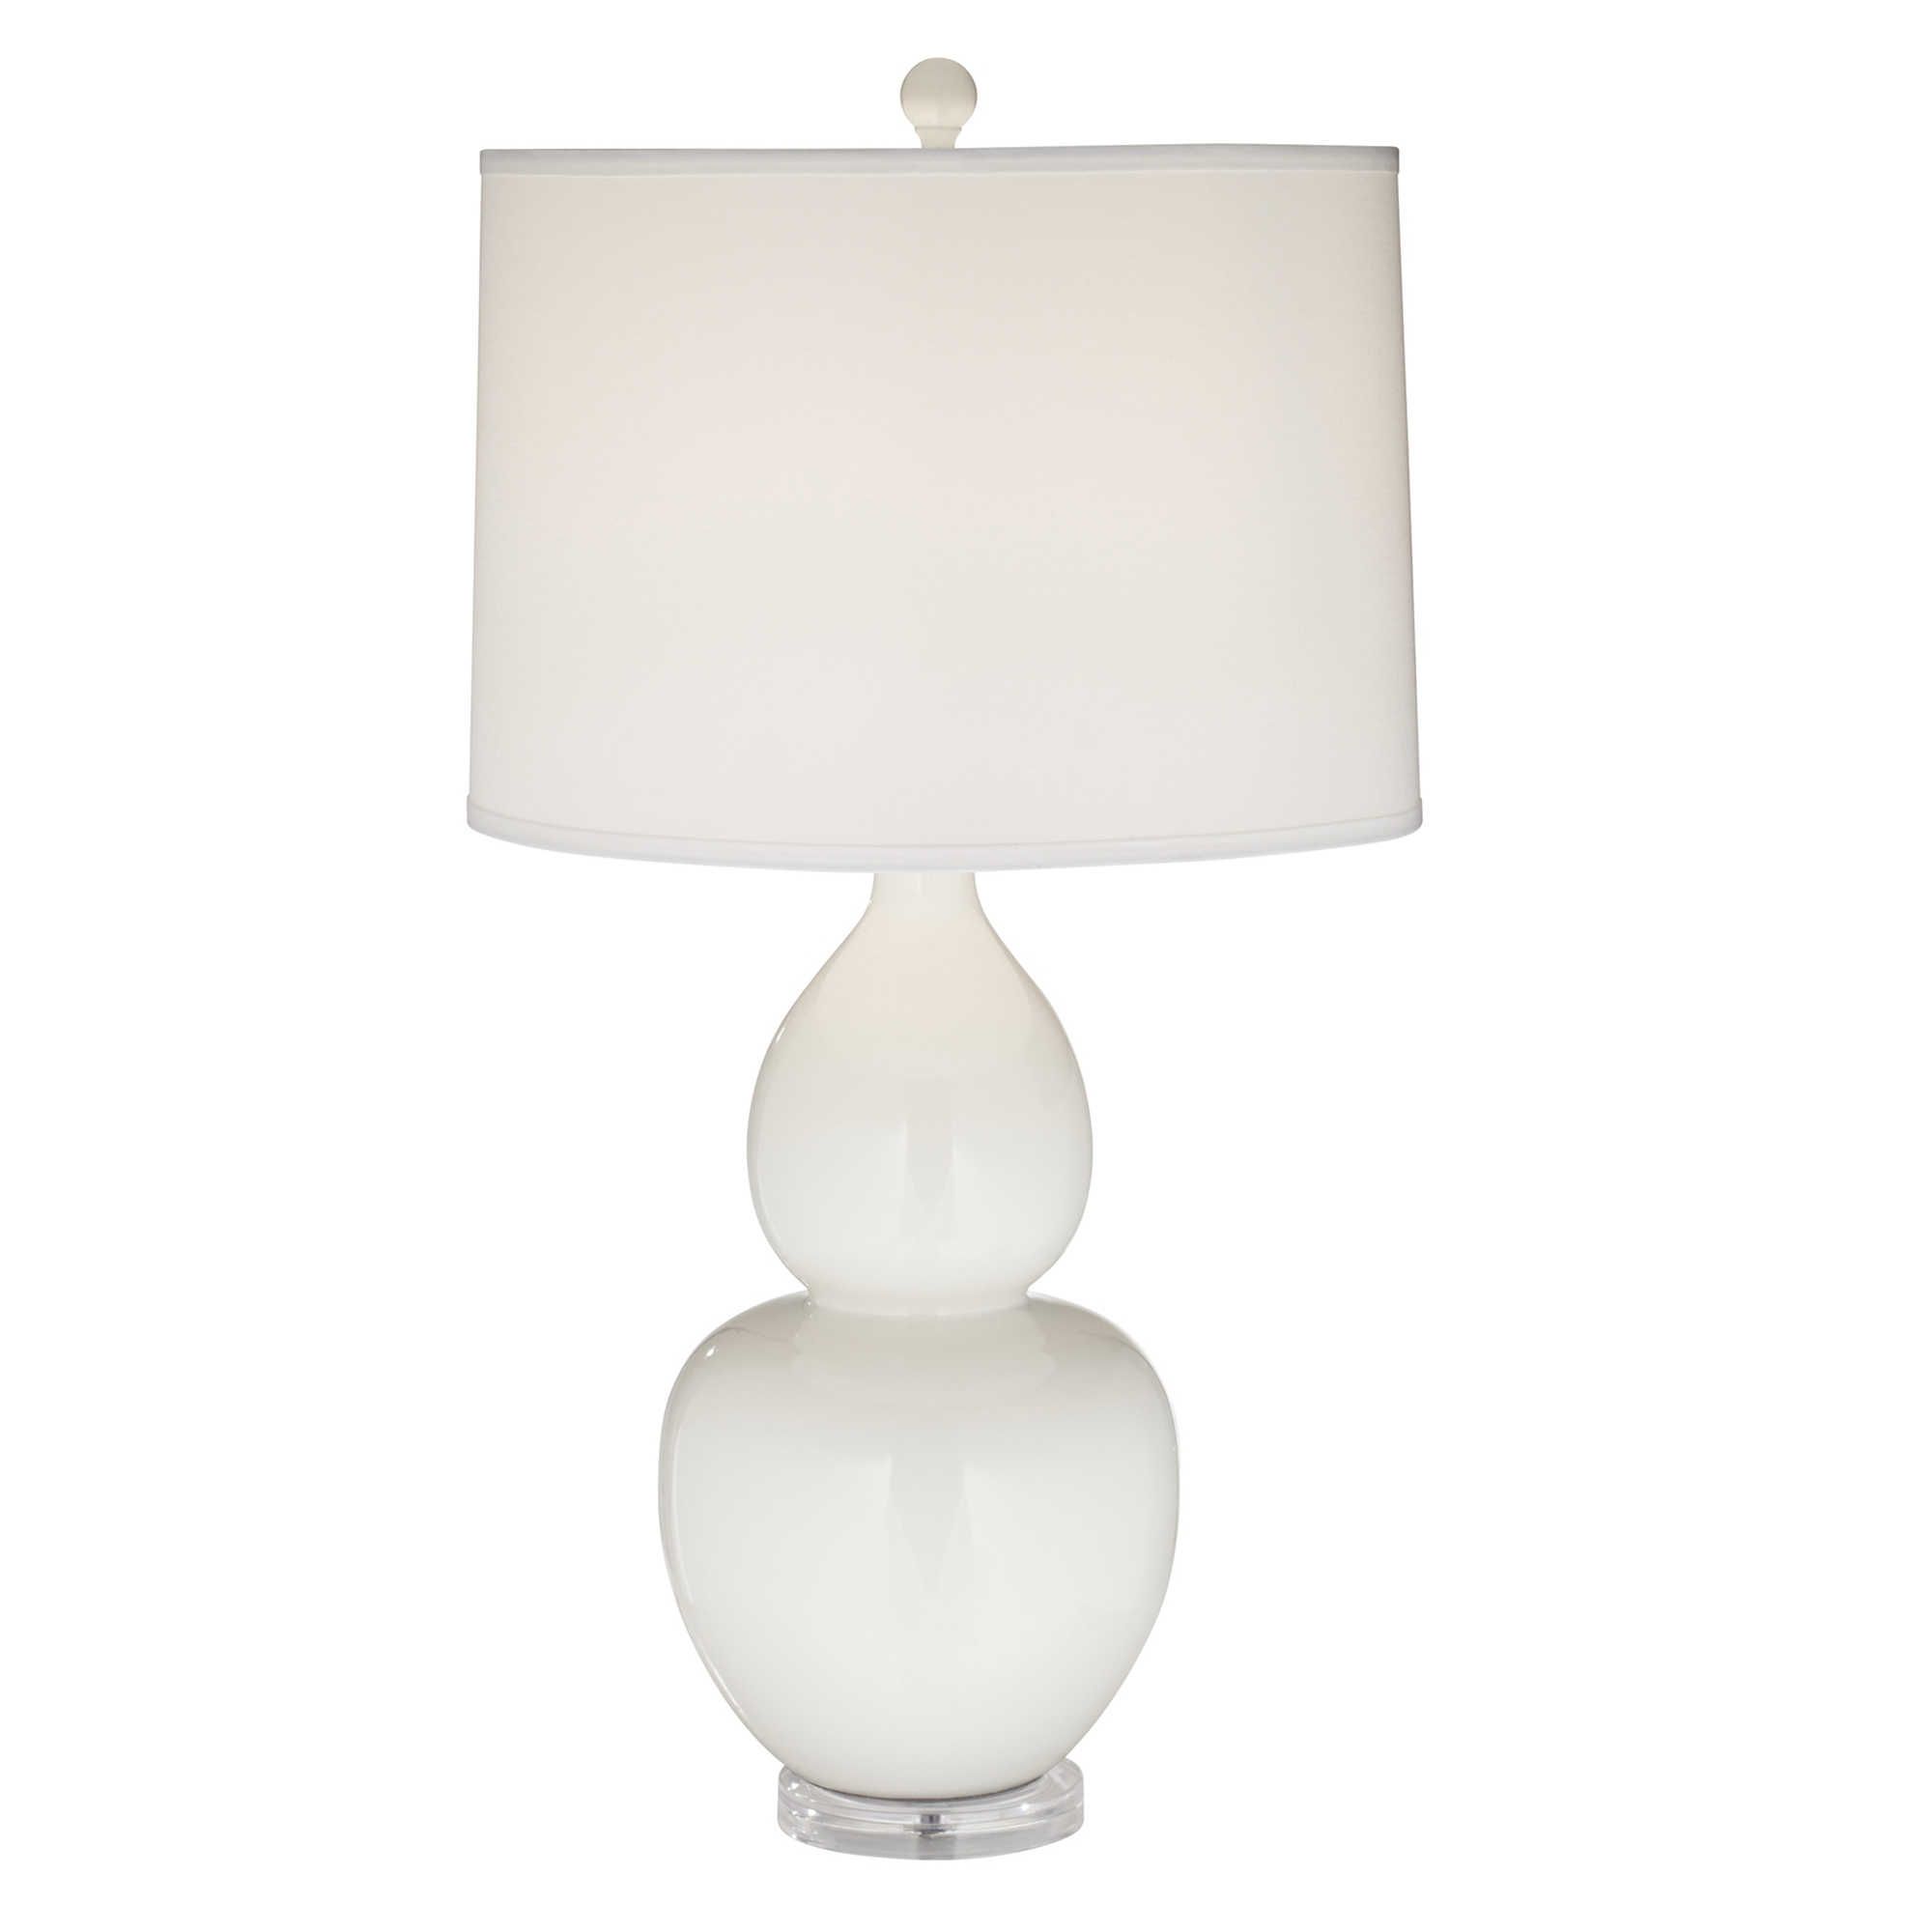 Pacific Coast® Lighting White Contempo Table Lamp in White with Drum Shade | Bed Bath & Beyond